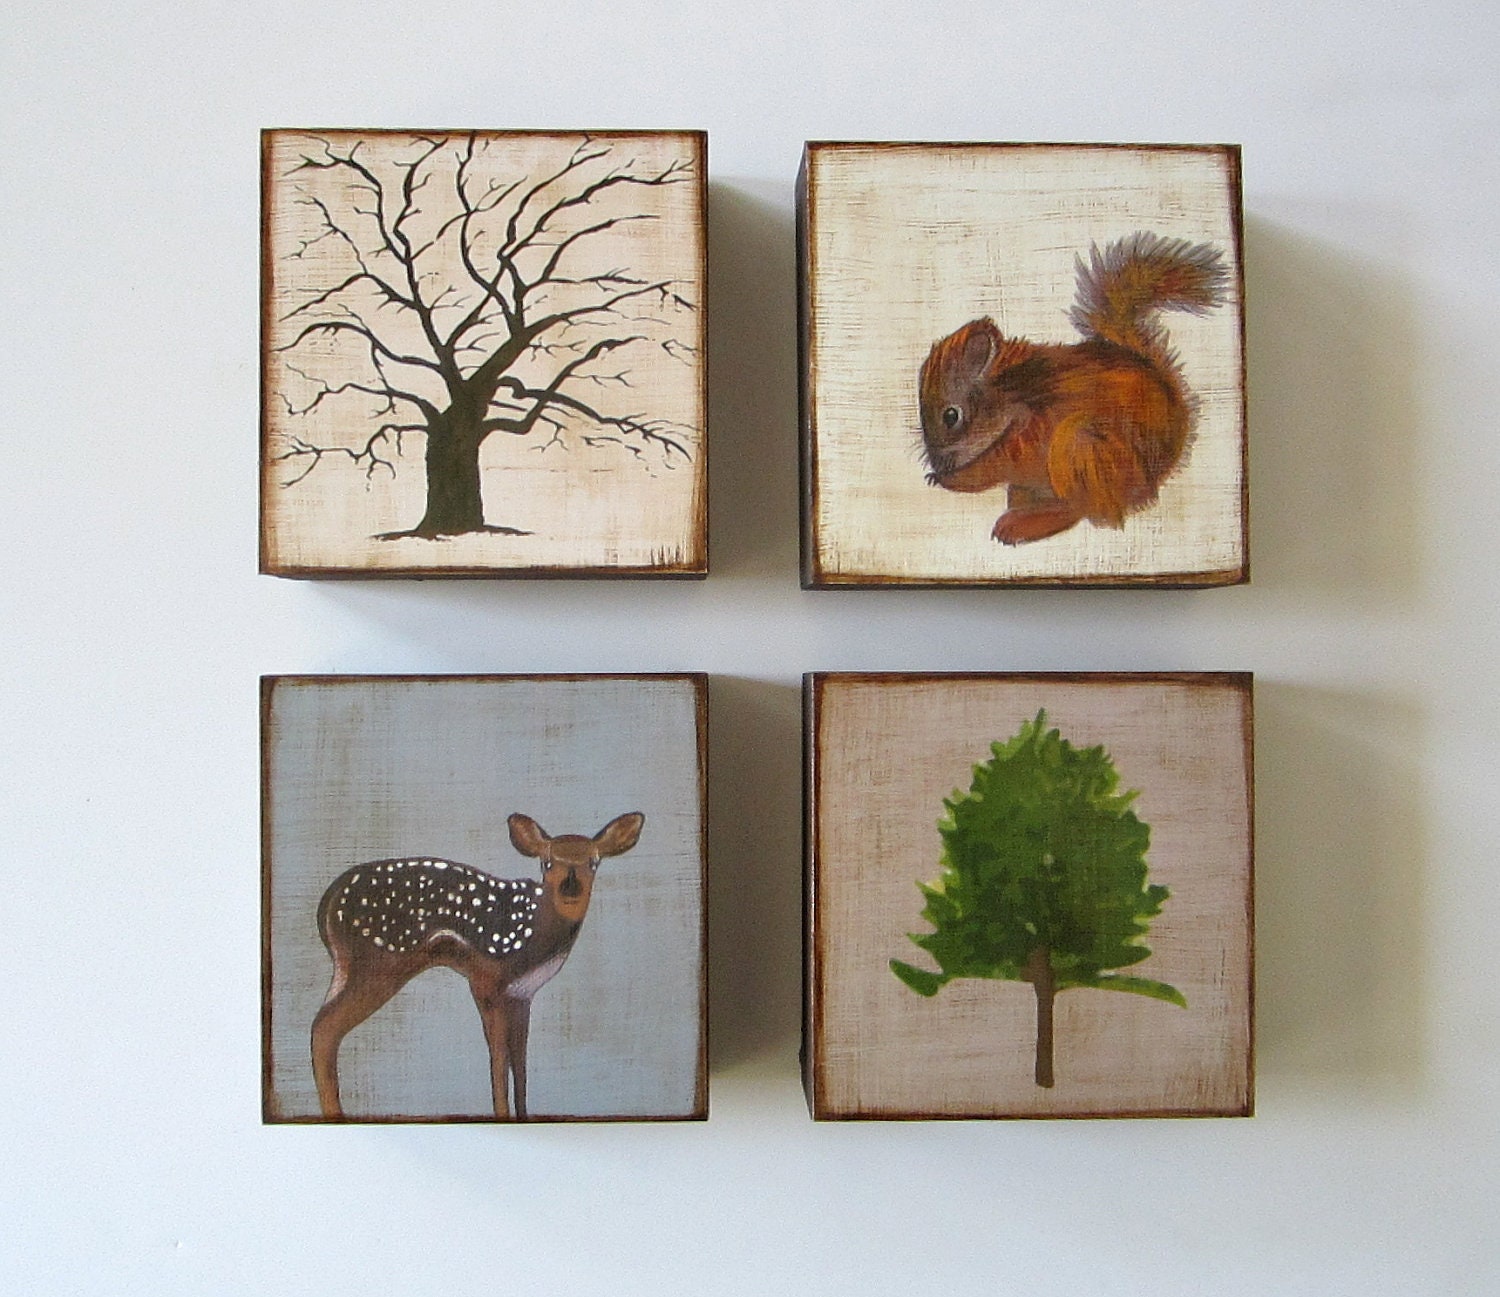 Popular items for wood wall decor on Etsy